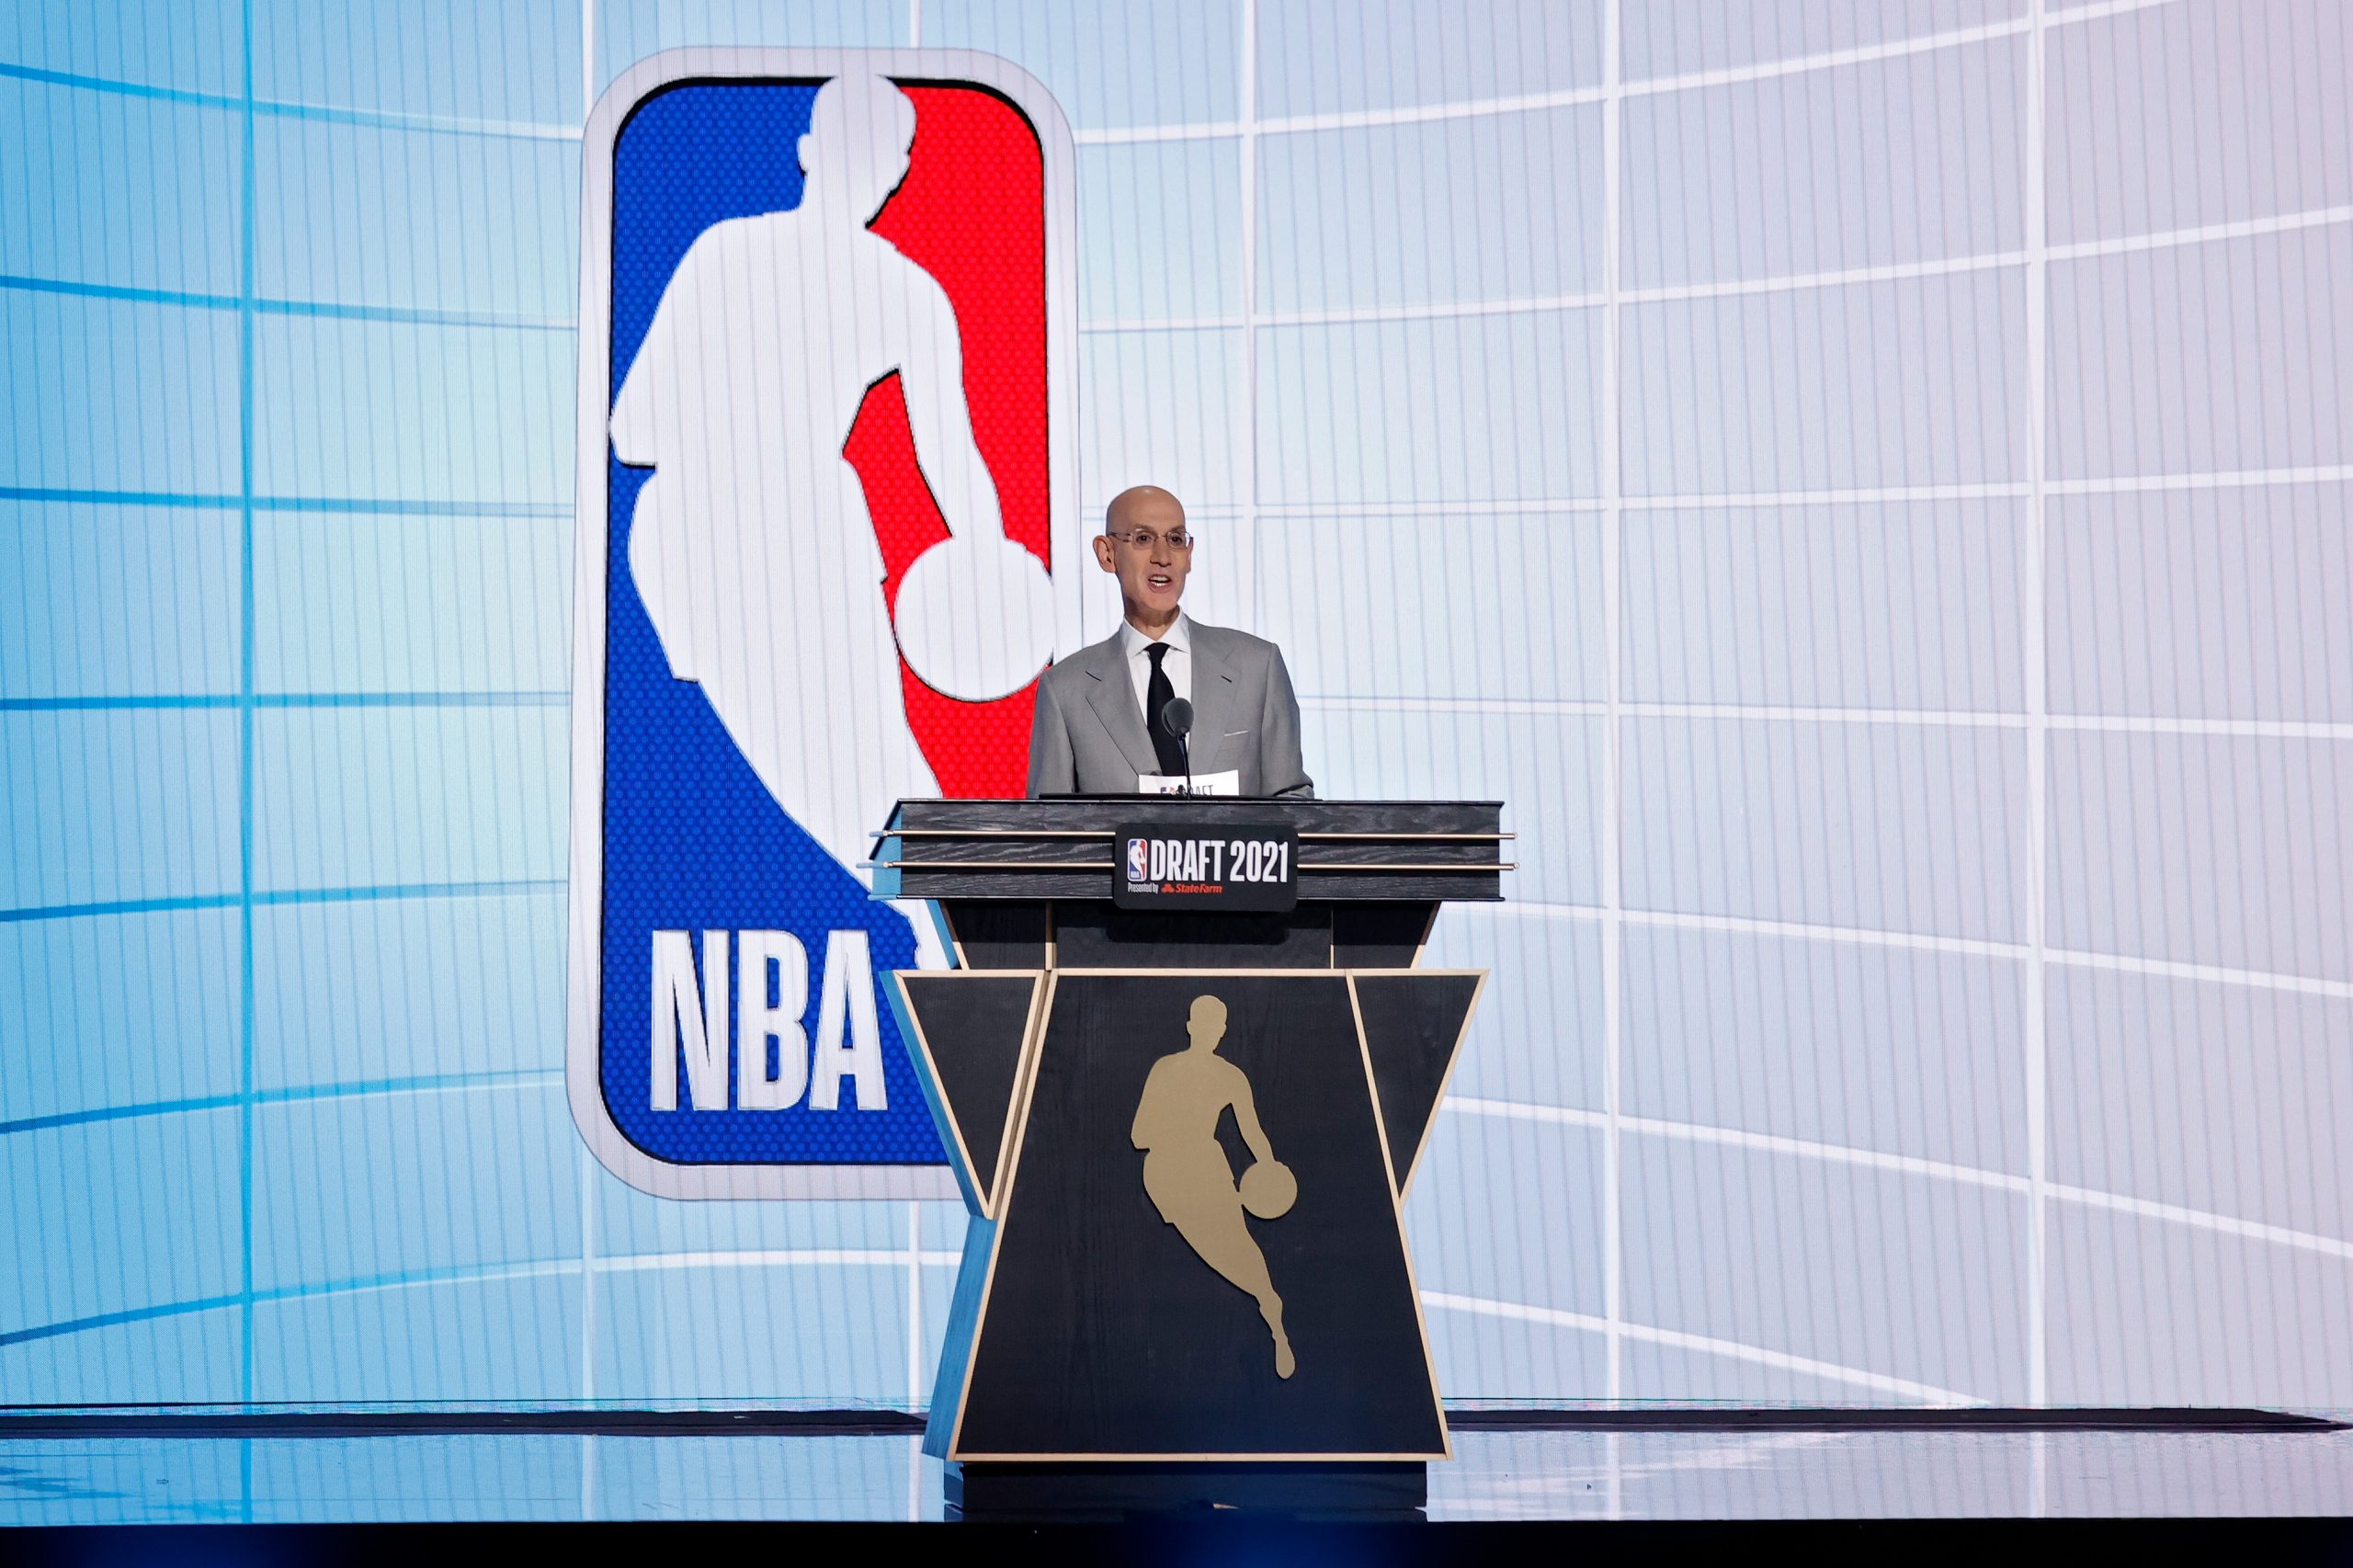 NEW YORK, NEW YORK - JULY 29: NBA commissioner Adam Silver speaks during the 2021 NBA Draft at the ...